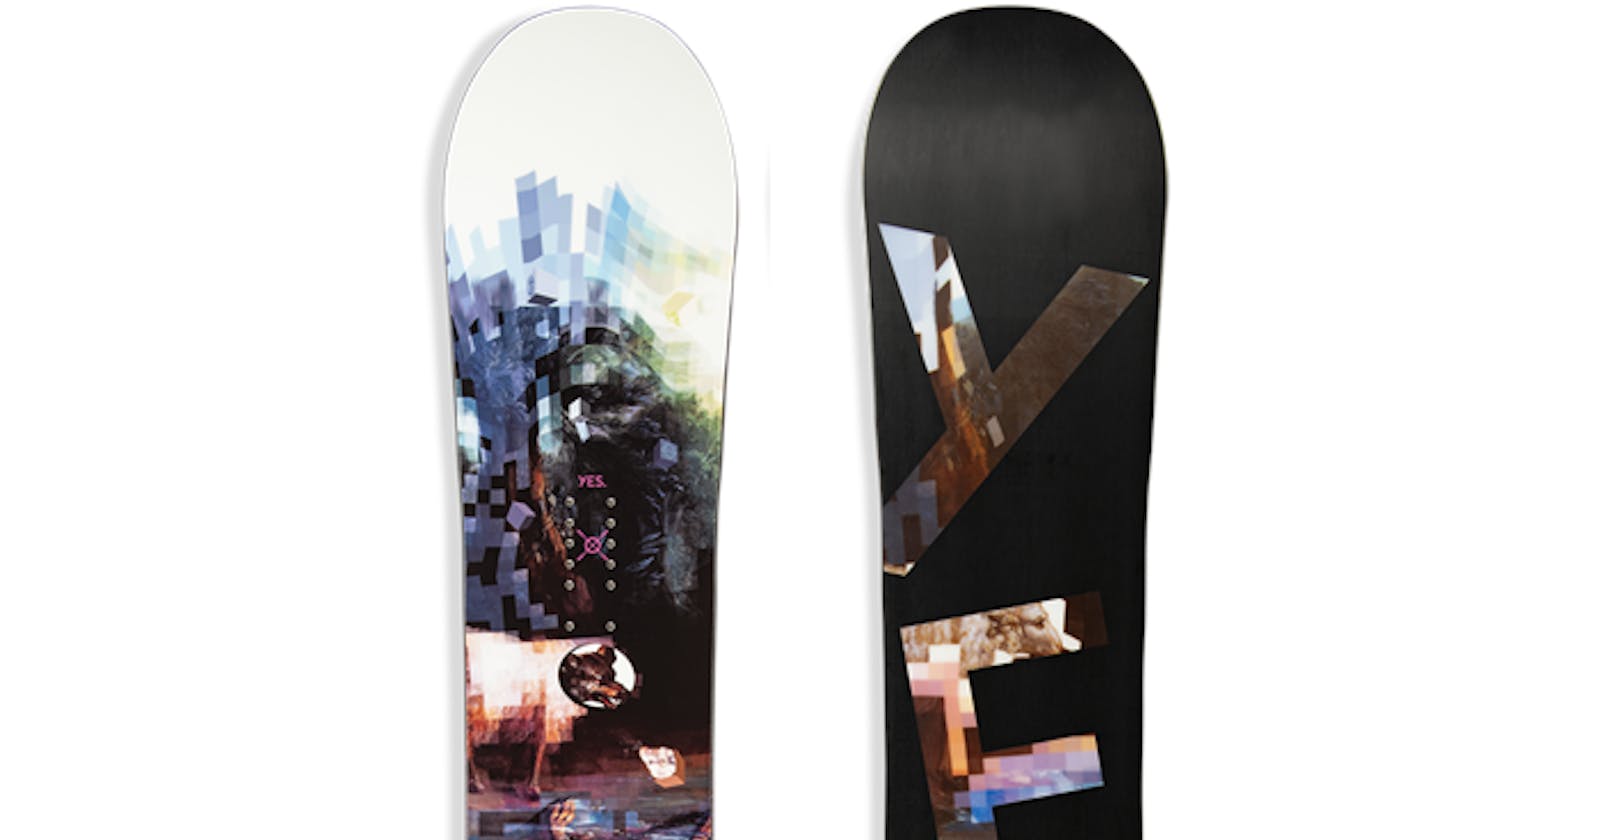 The Top 5 "YES" Snowboards for Peak Performance